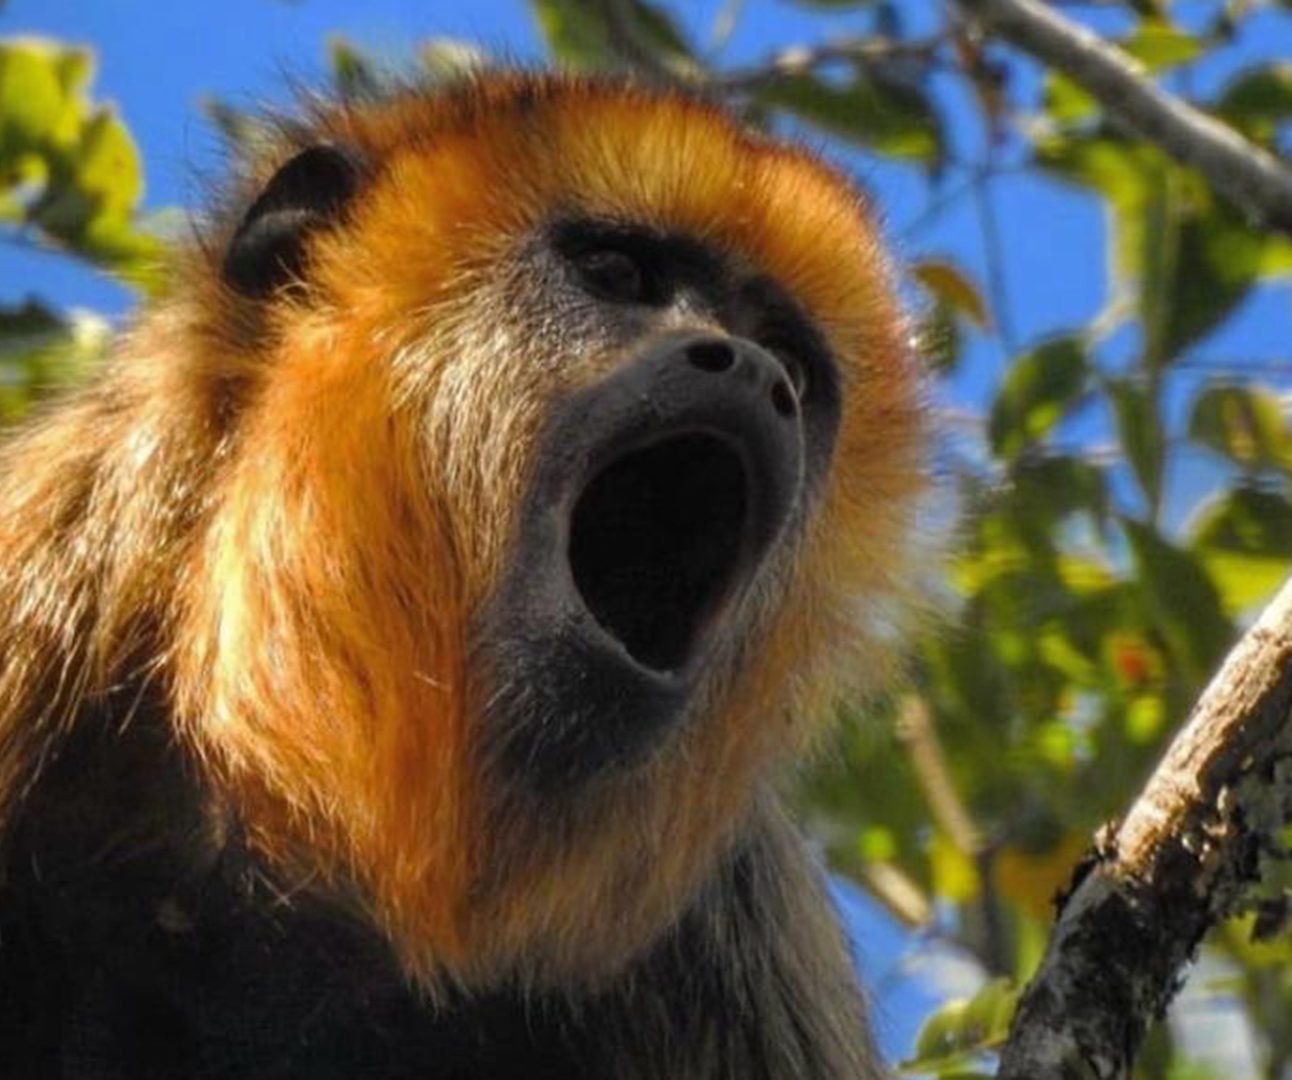 A close-up of a black-and-gold howler monkey. Its mouth is wide open in a howl and it is in a tree